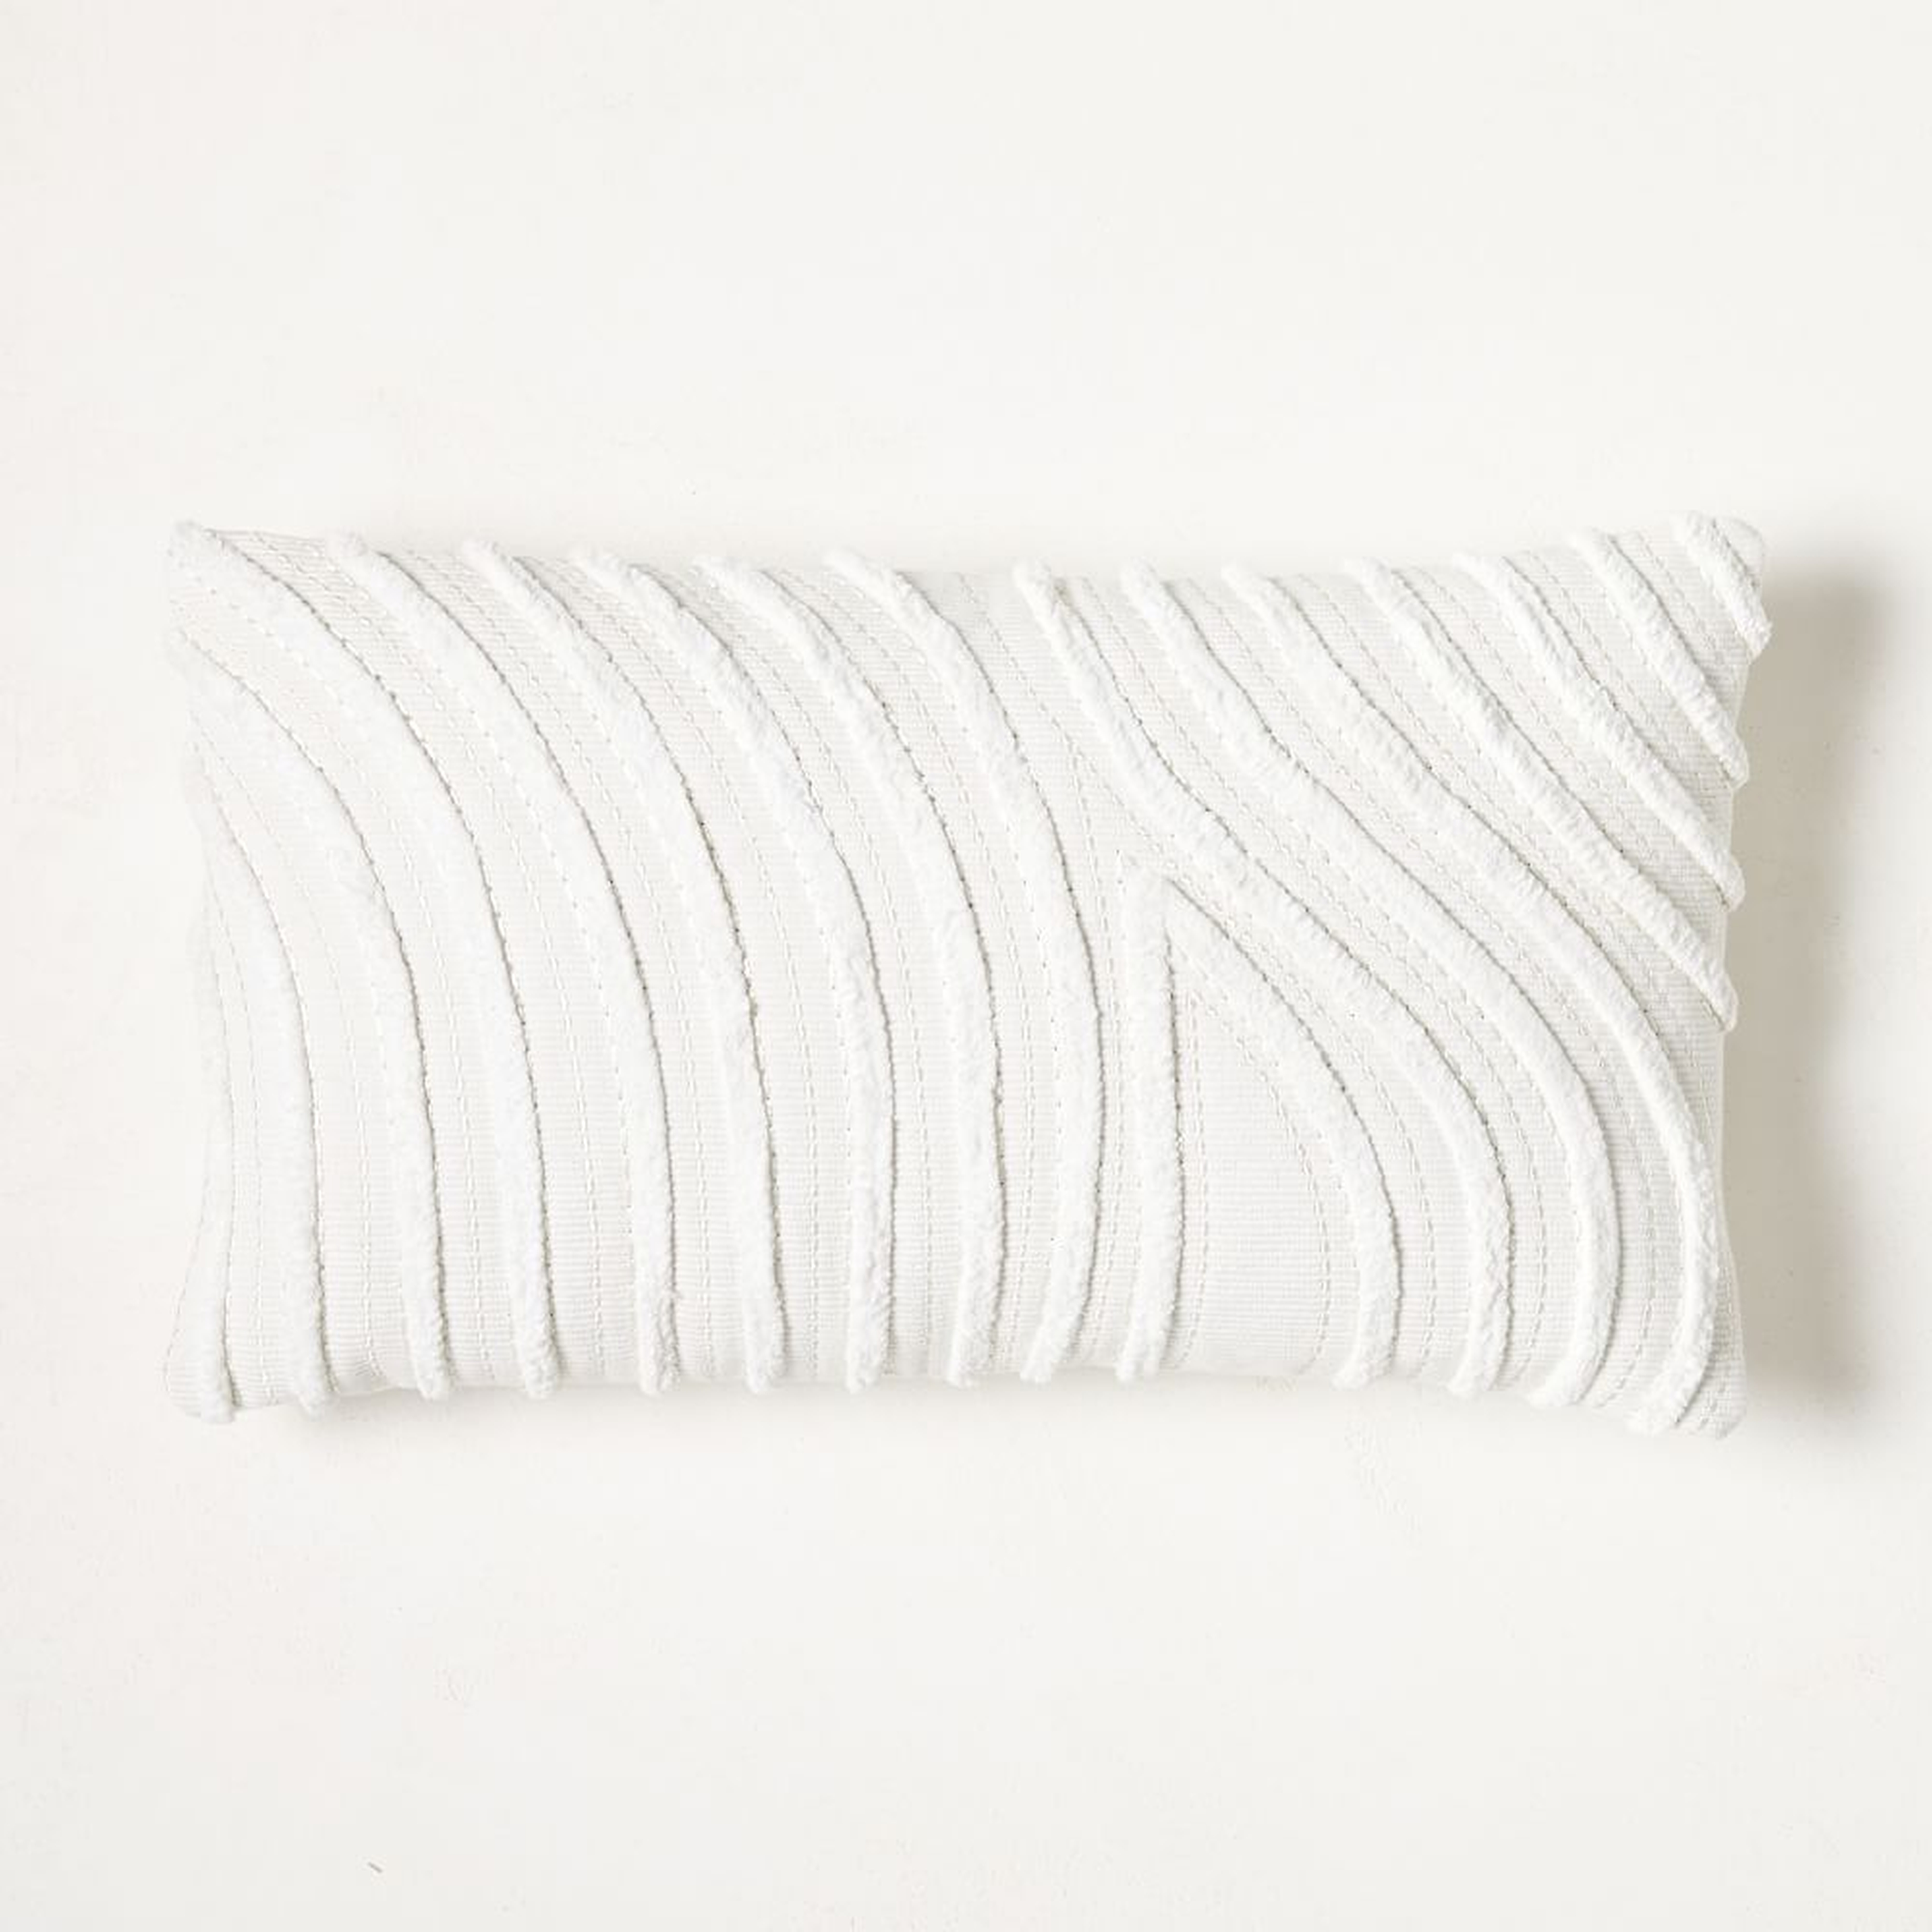 Textured Waves Pillow Cover, 12"x21", White - West Elm